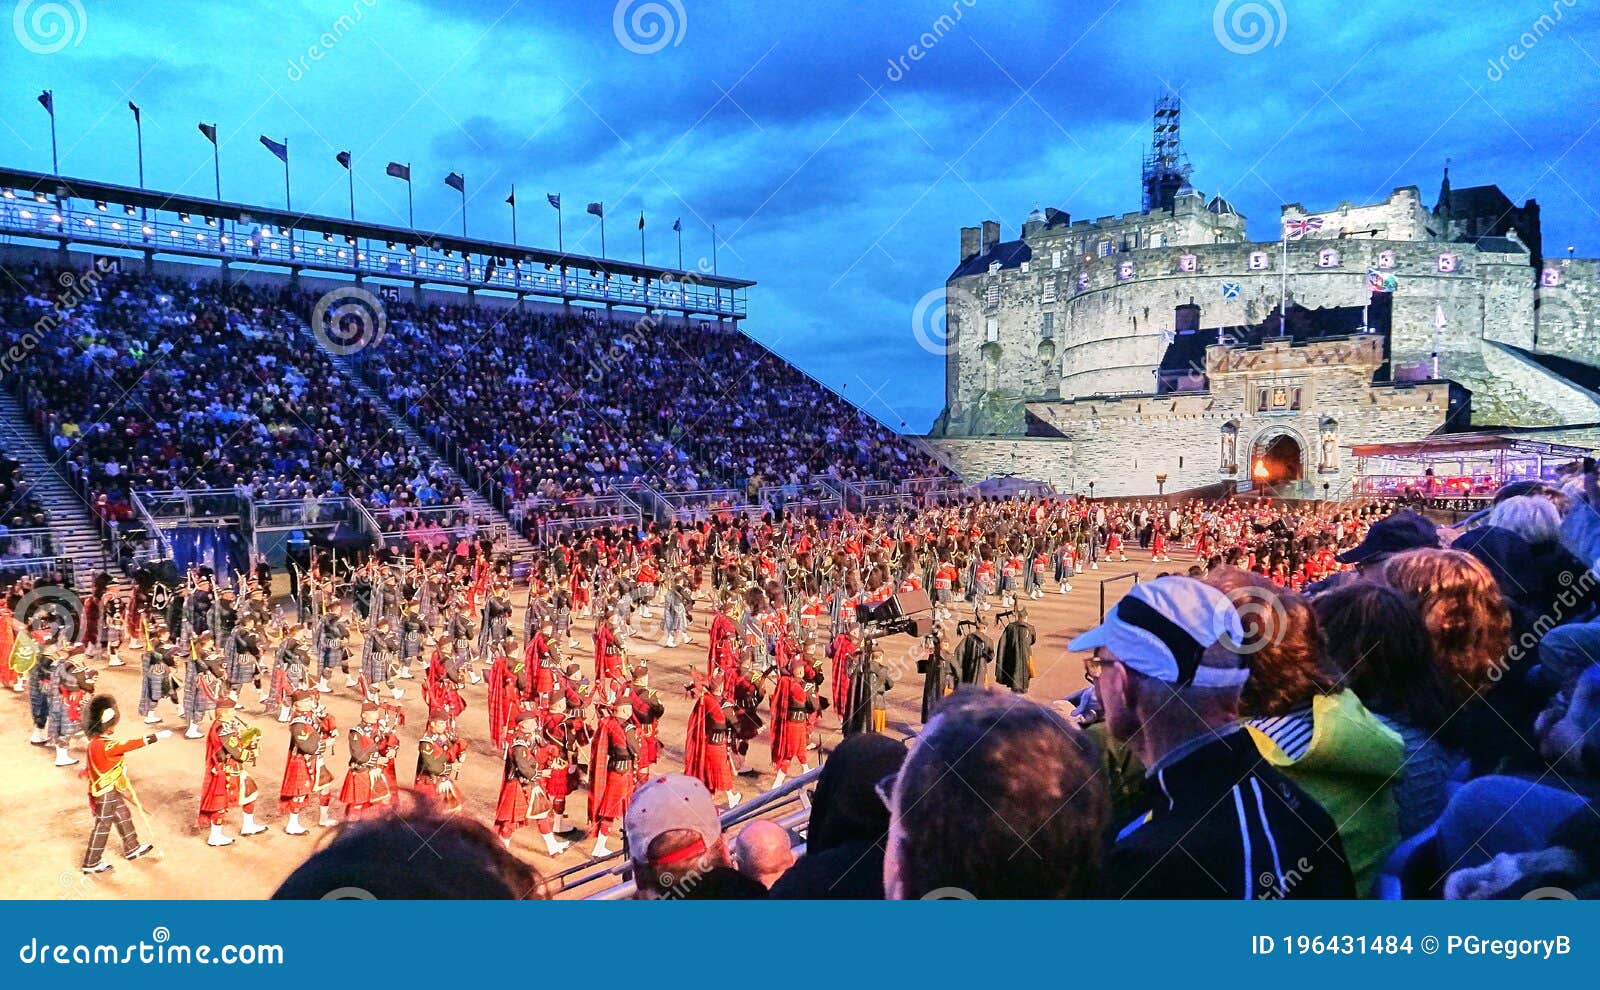 The Tattoo Festival is quite an outdoor spectacle but be prepared to endure  inclimate weather  Reviews Photos  The Royal Edinburgh Military Tattoo   Tripadvisor